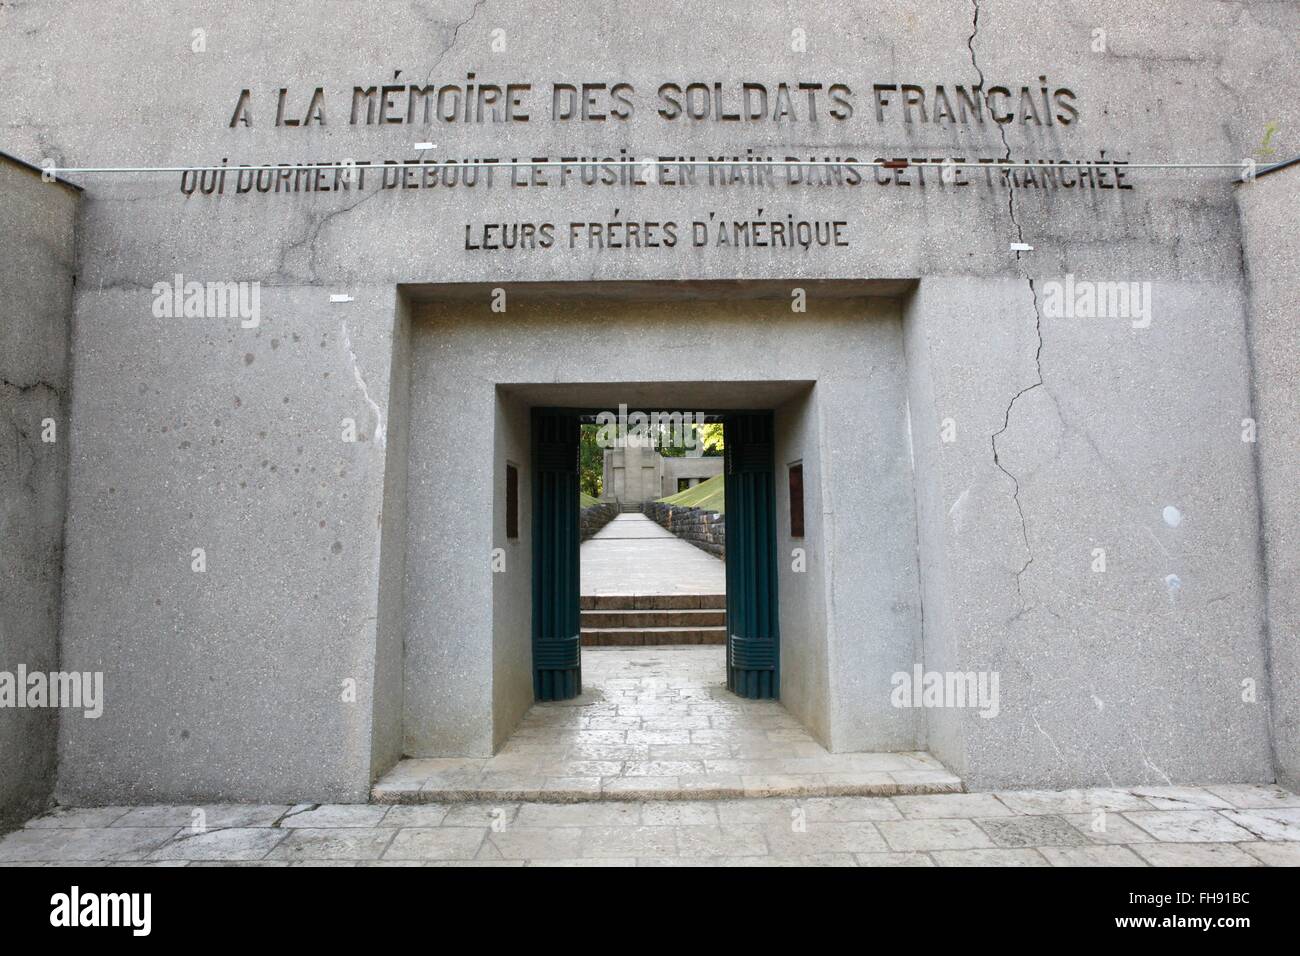 Memorial bayonet trench; French soldiers were pretended buried alive. battlefield of Verdun. June 2015. Stock Photo